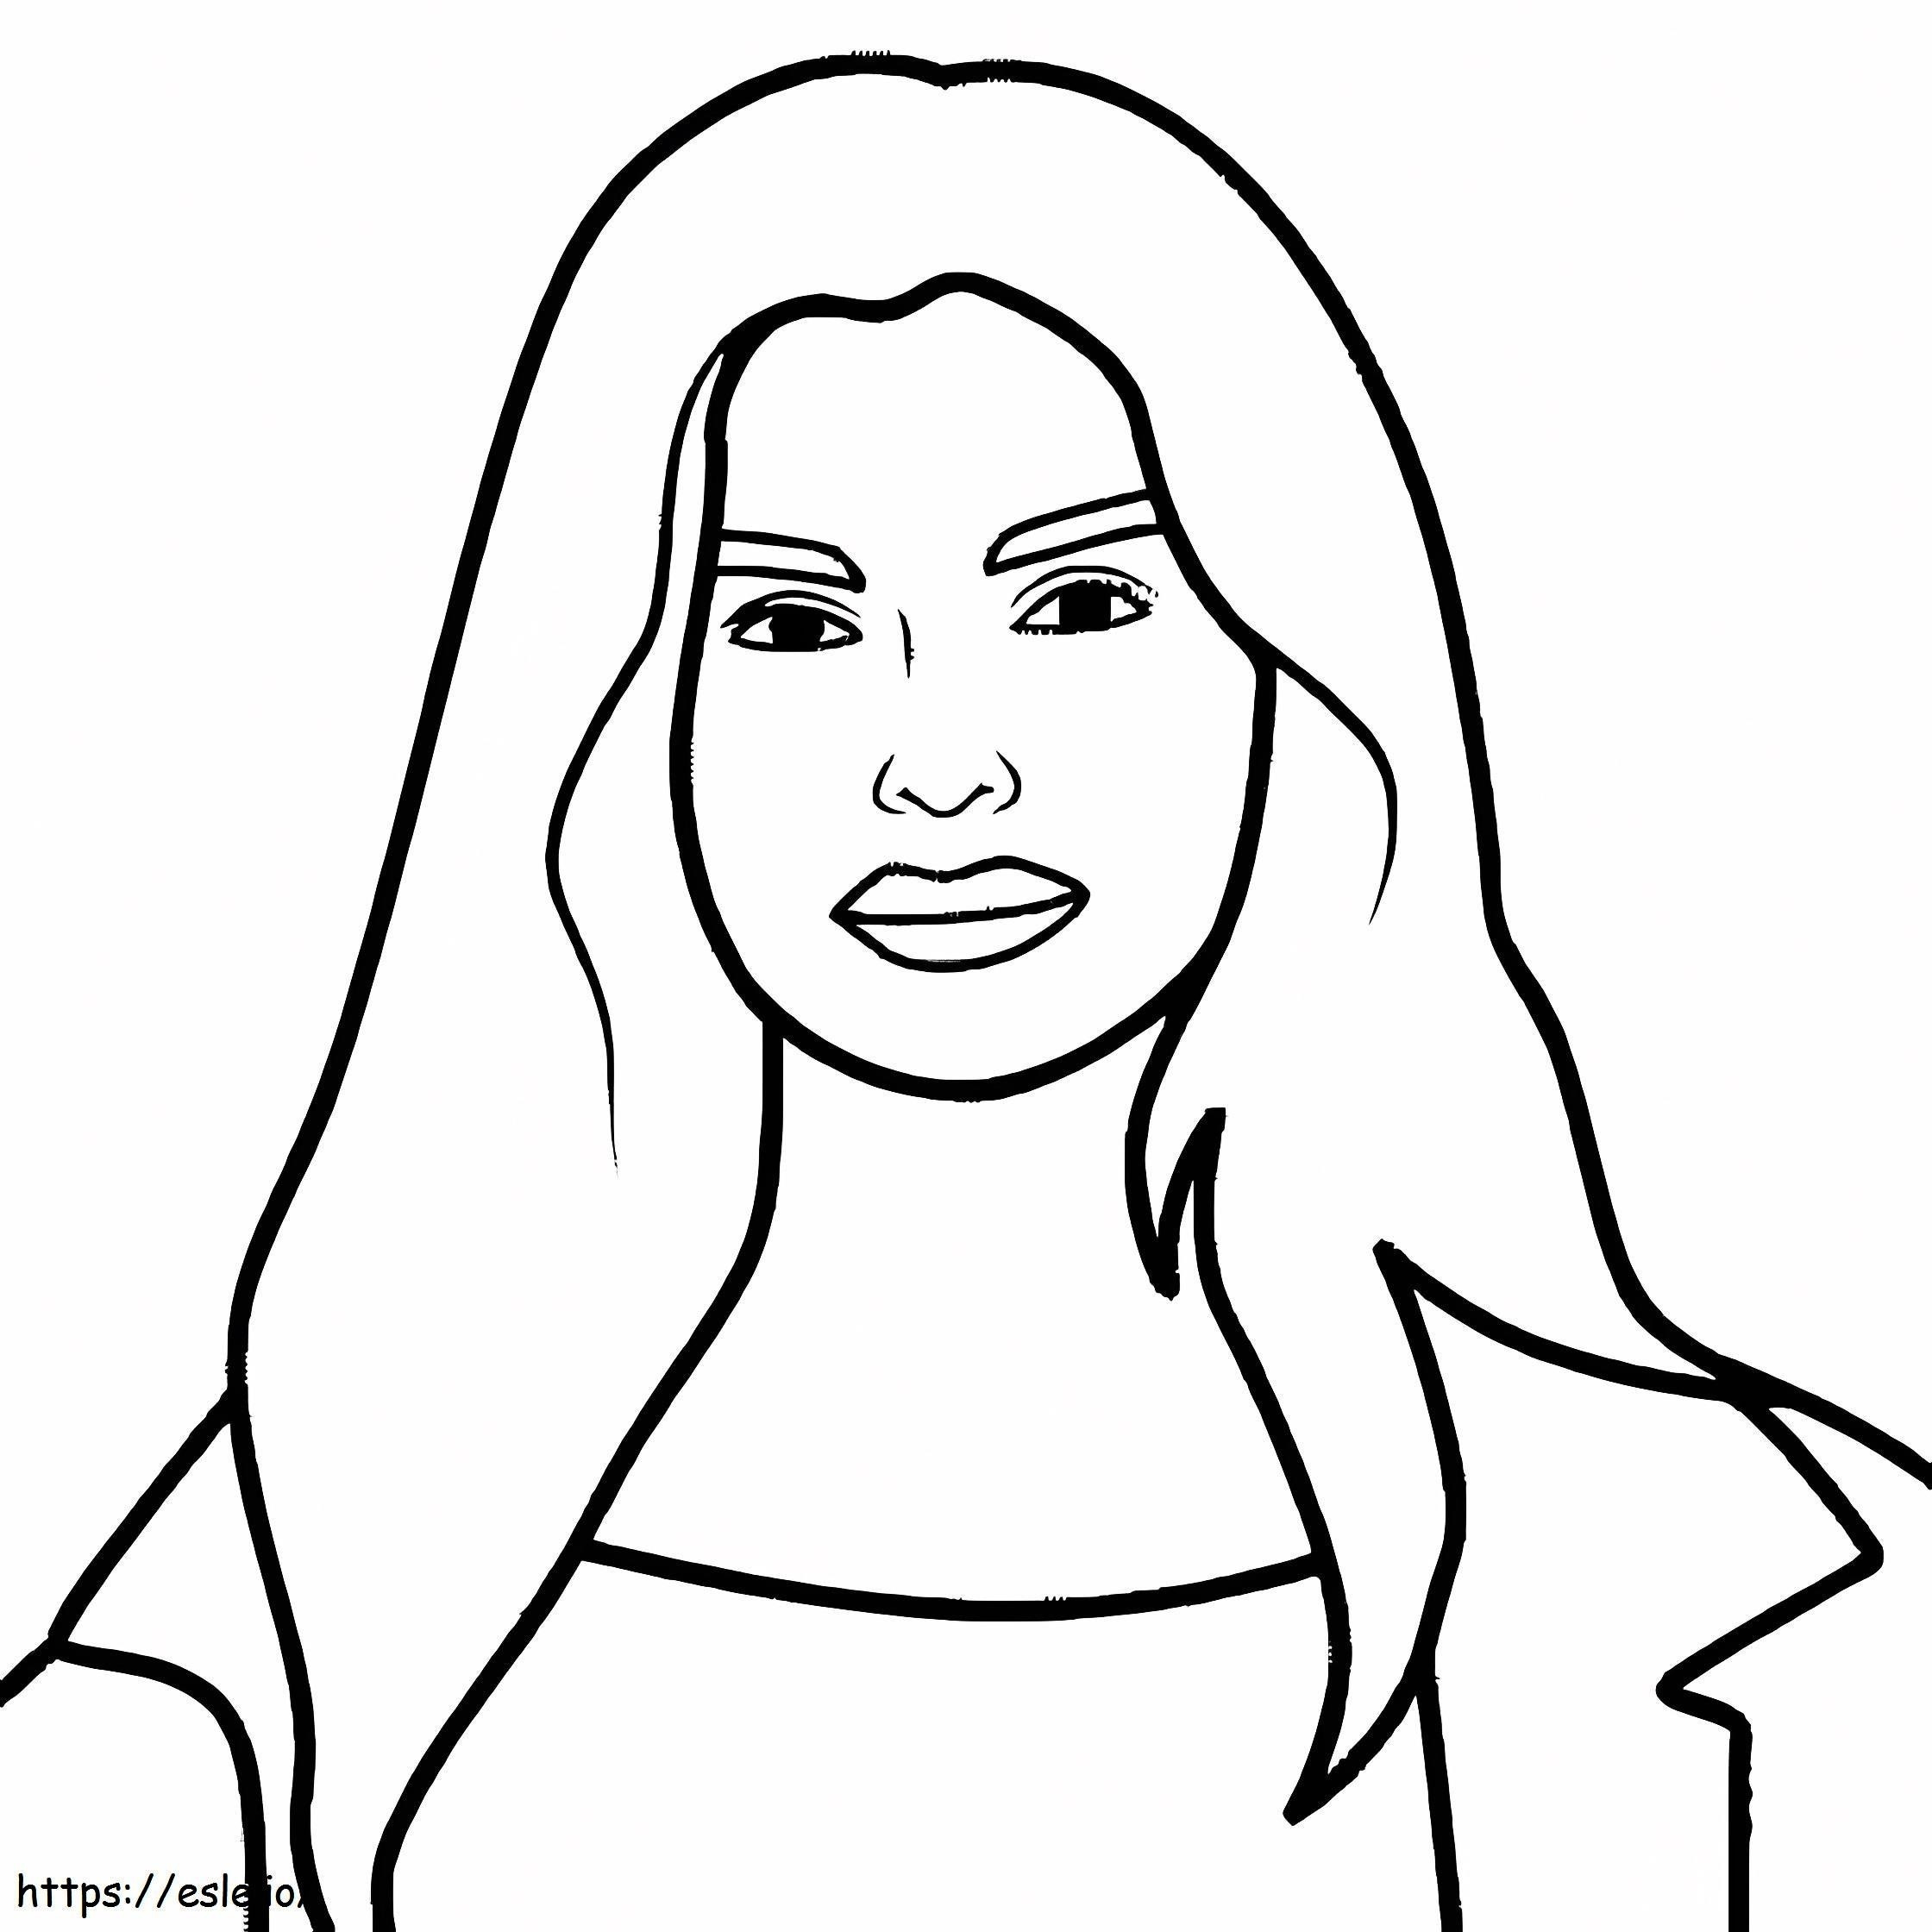 Addison Rae coloring page